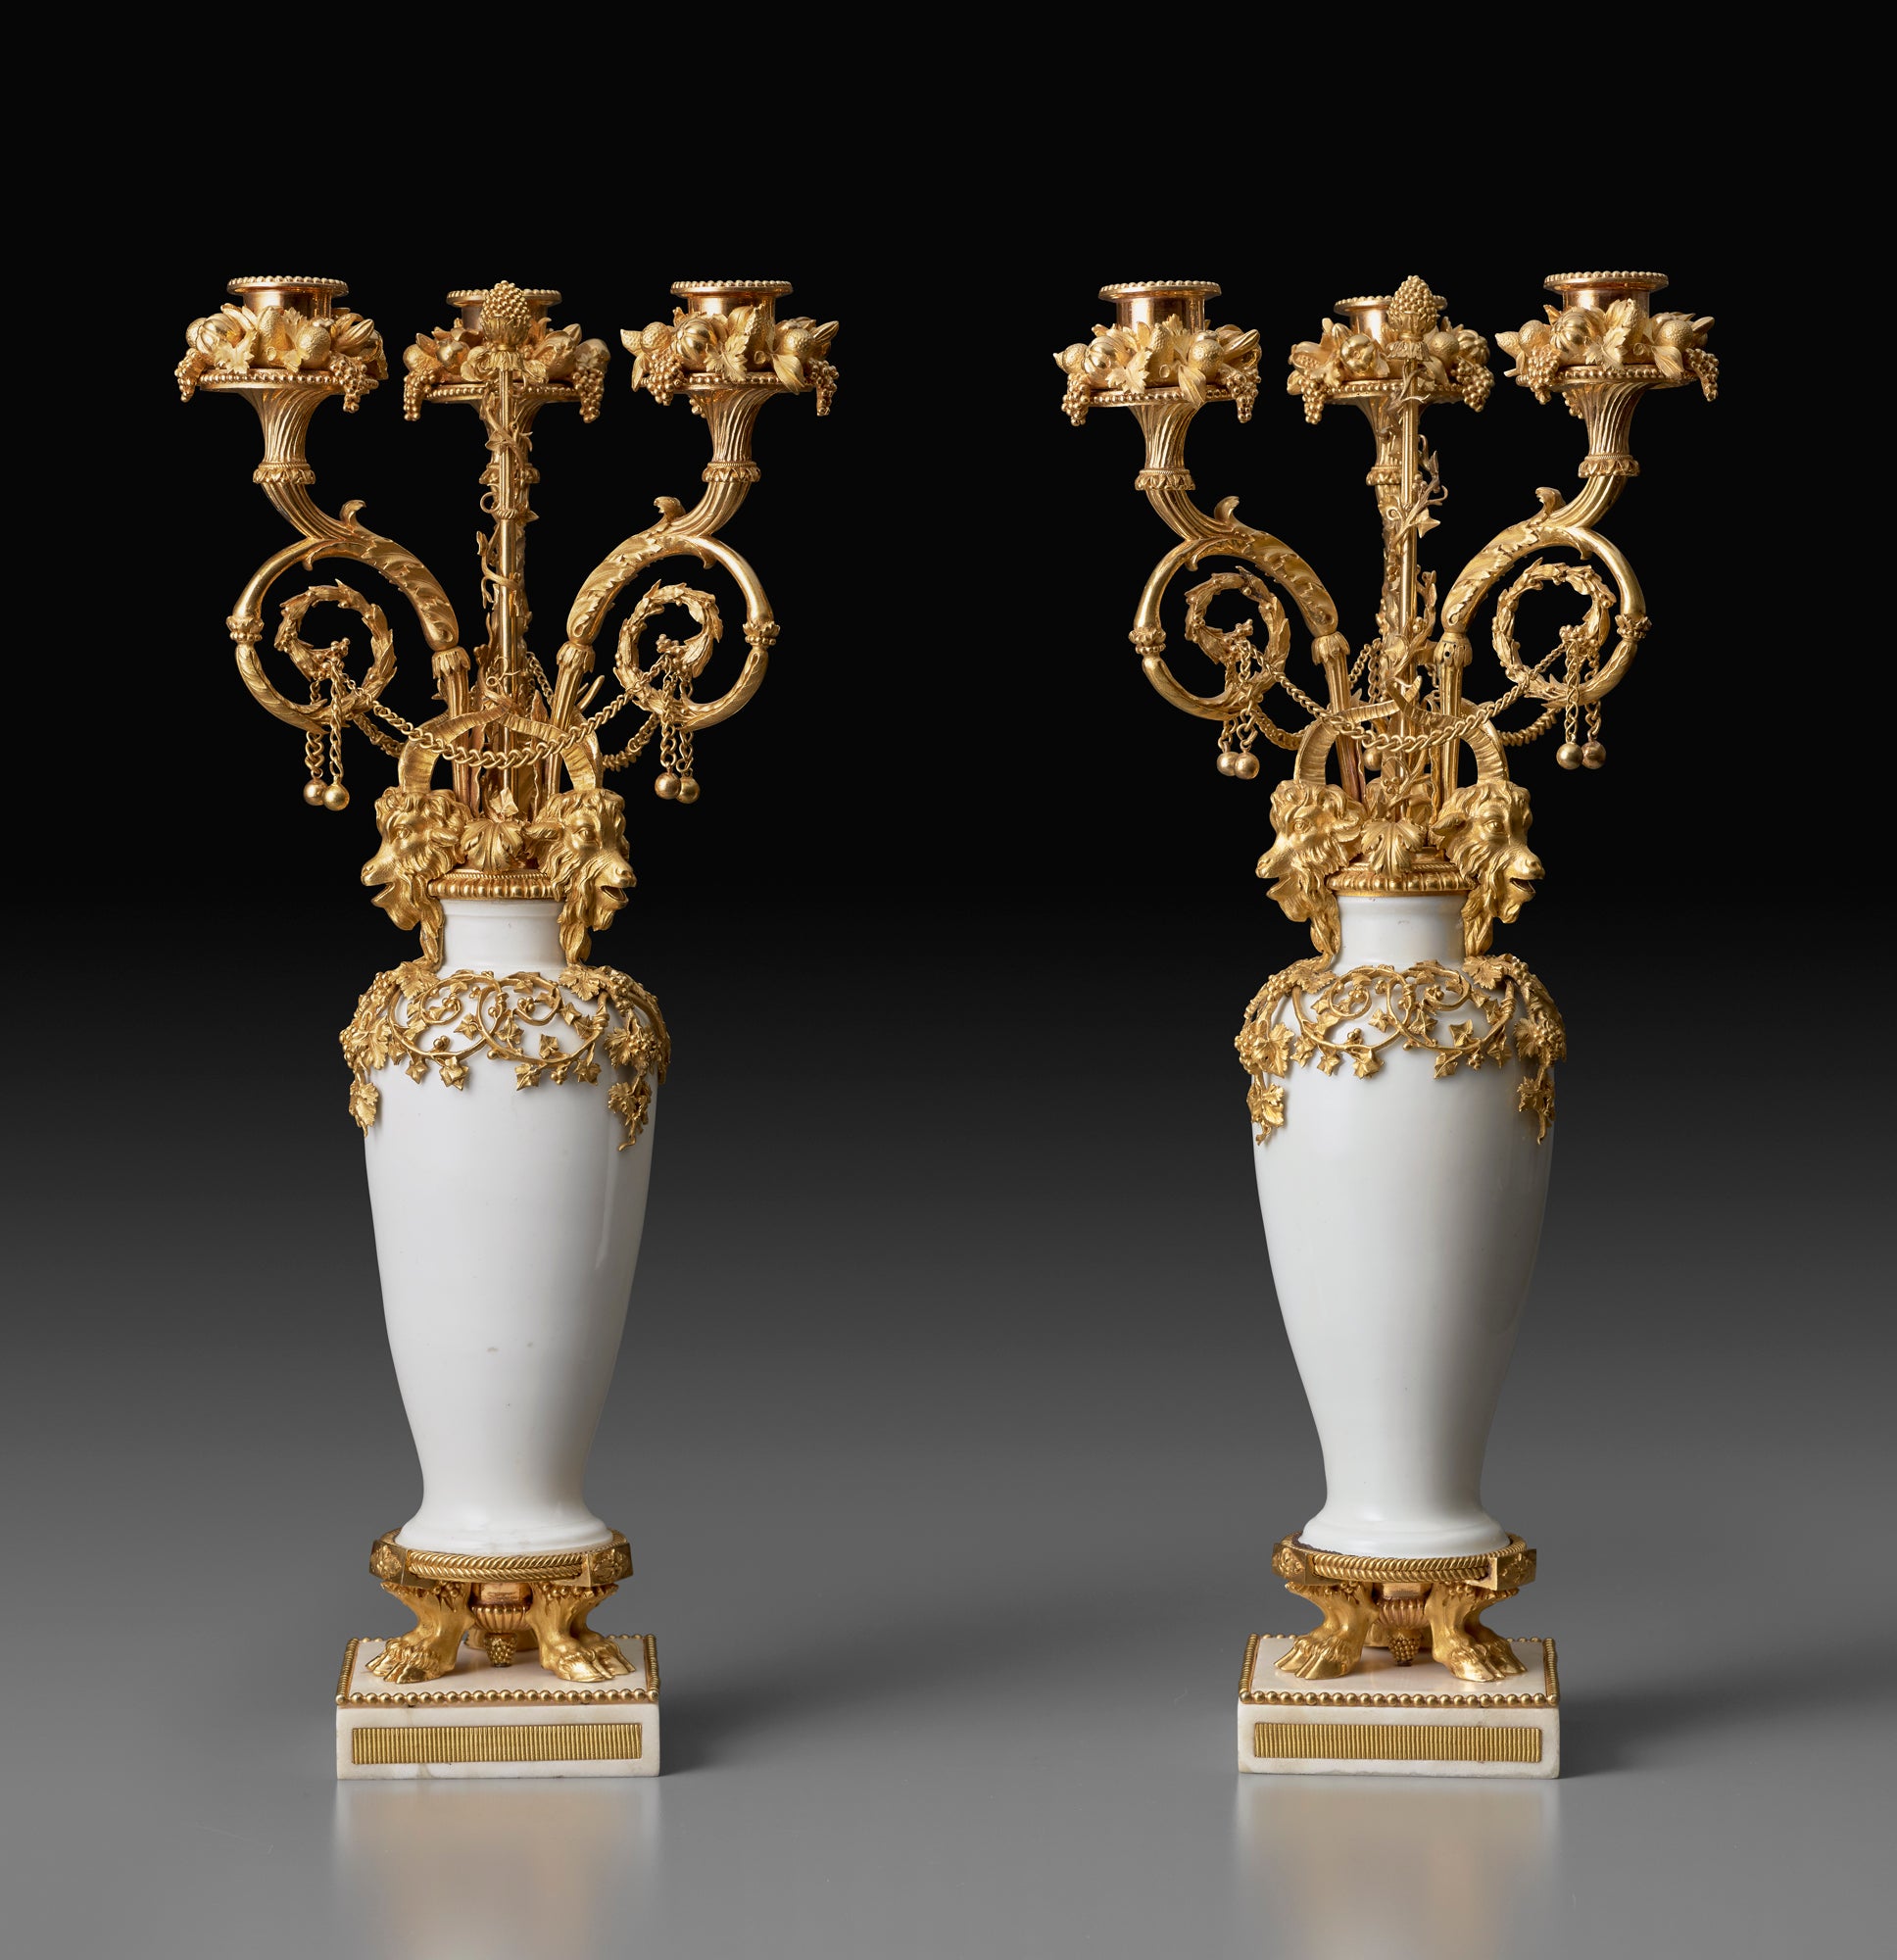 pair of gilt-bronze candelabra, circa 1782, with hard-paste porcelain and marble elements